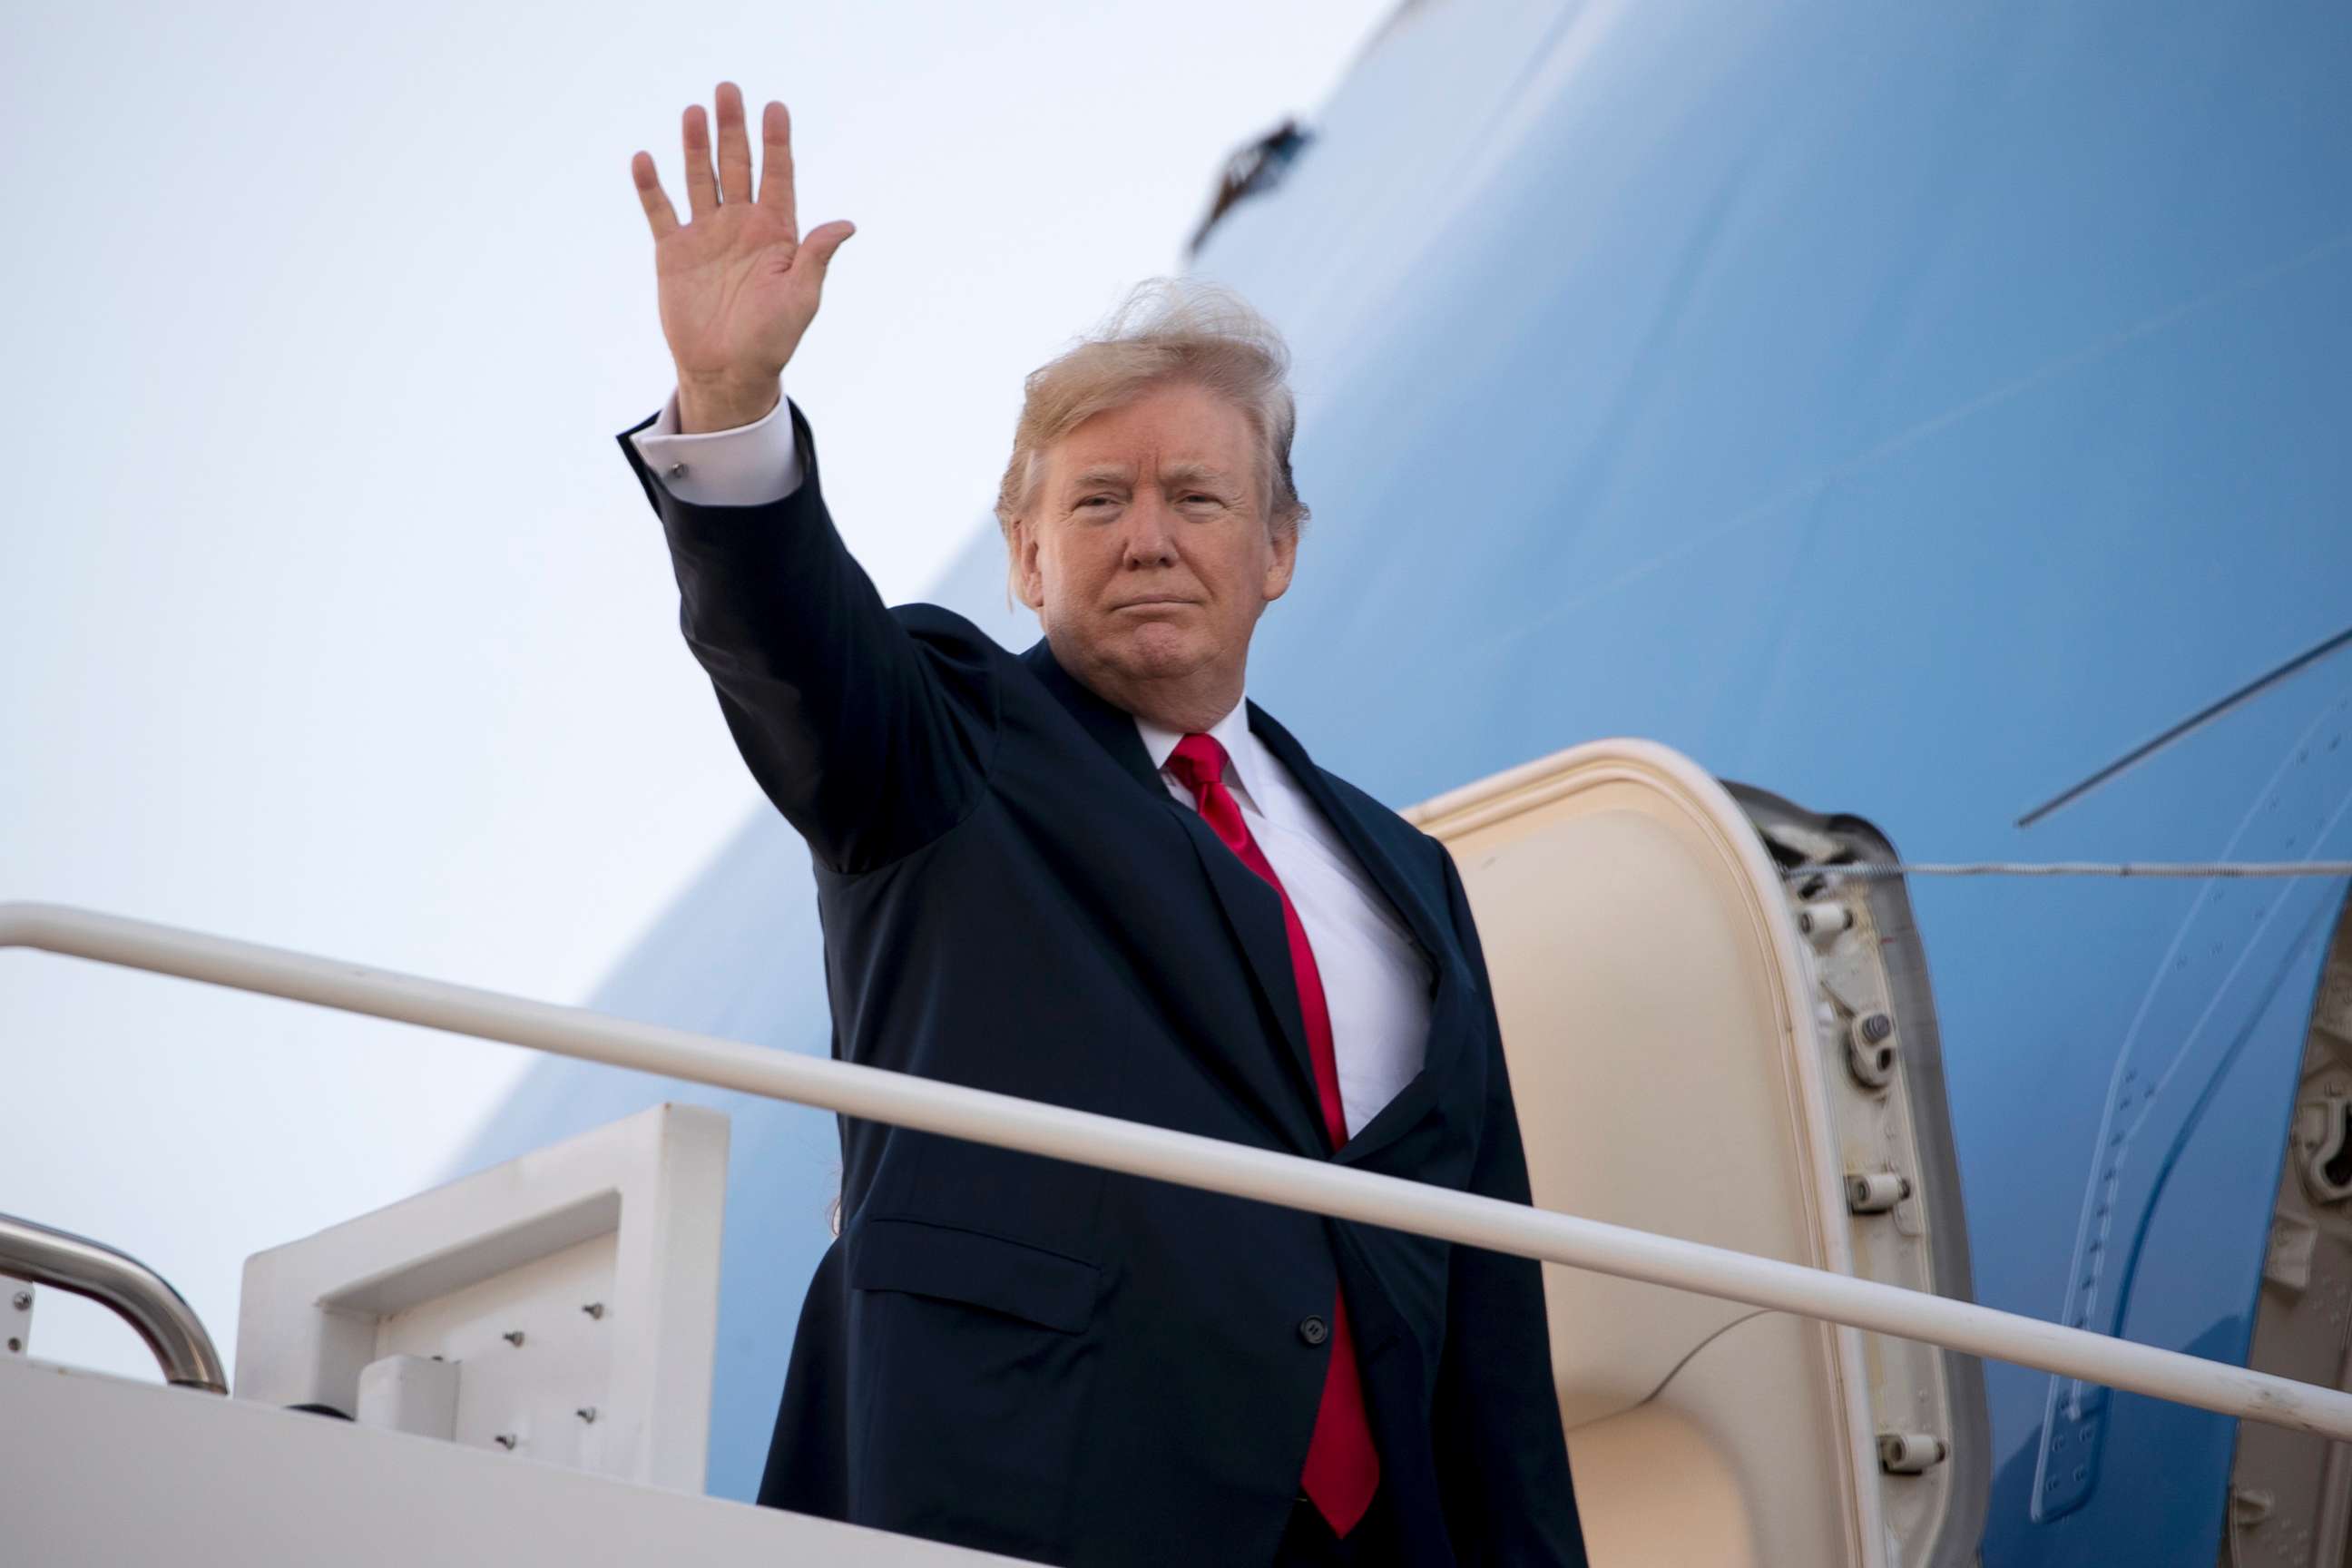 PHOTO: President Donald Trump waves as he boards Air Force One at Andrews Air Force Base, Md., Nov. 3, 2017, to travel to Hawaii, the first stop on a five country trip through Asia.